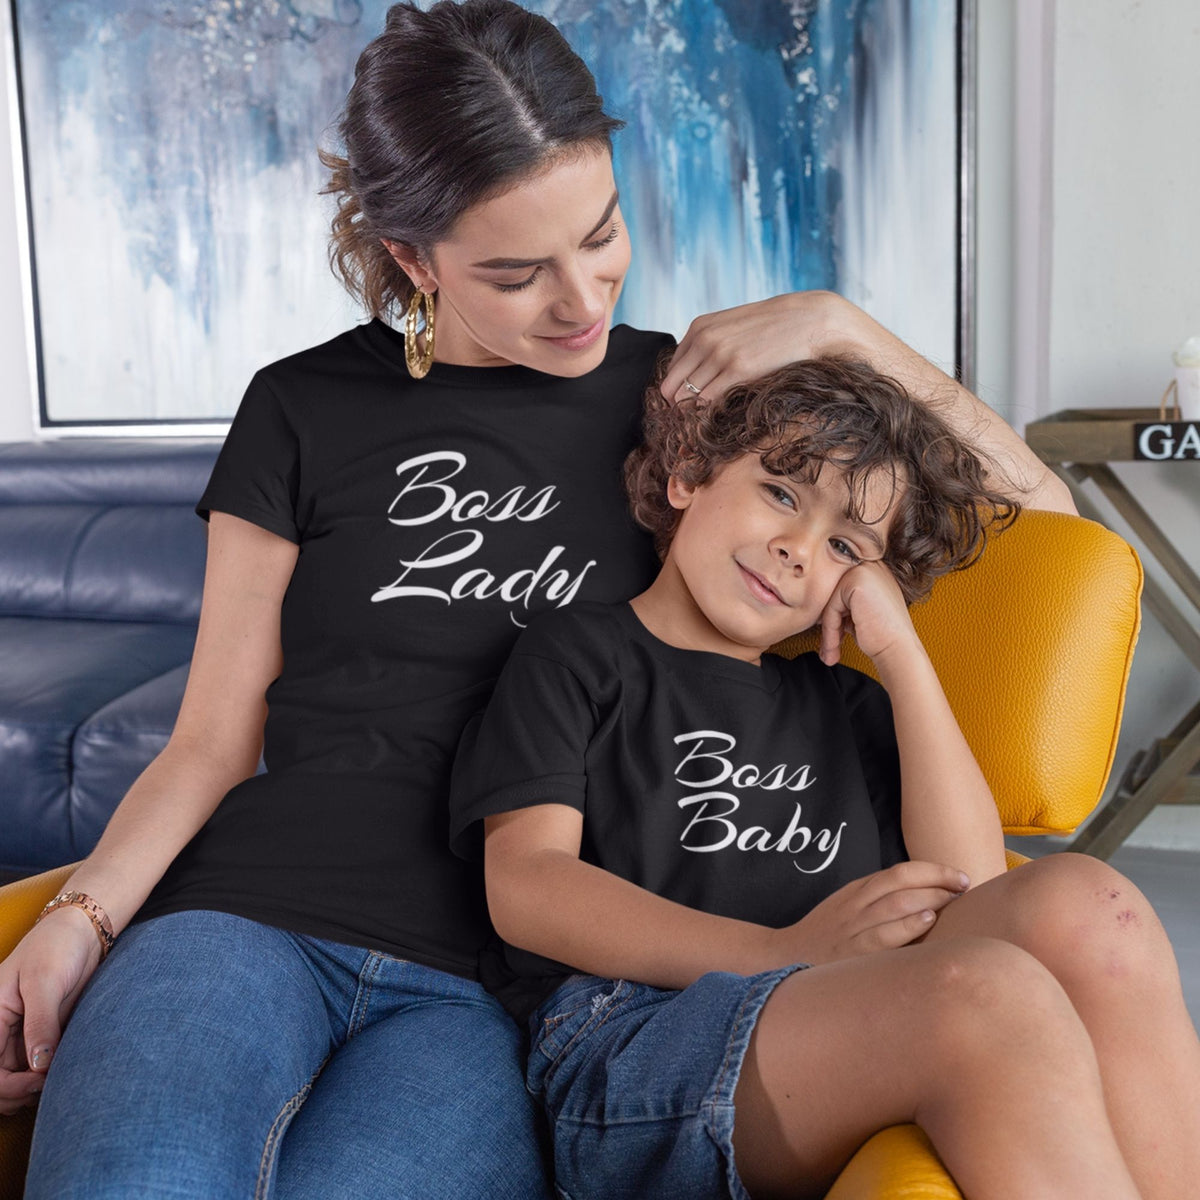 boss-lady-matching-family-black-t-shirts-for-mom-dad-son-daughter-gogirgit-com